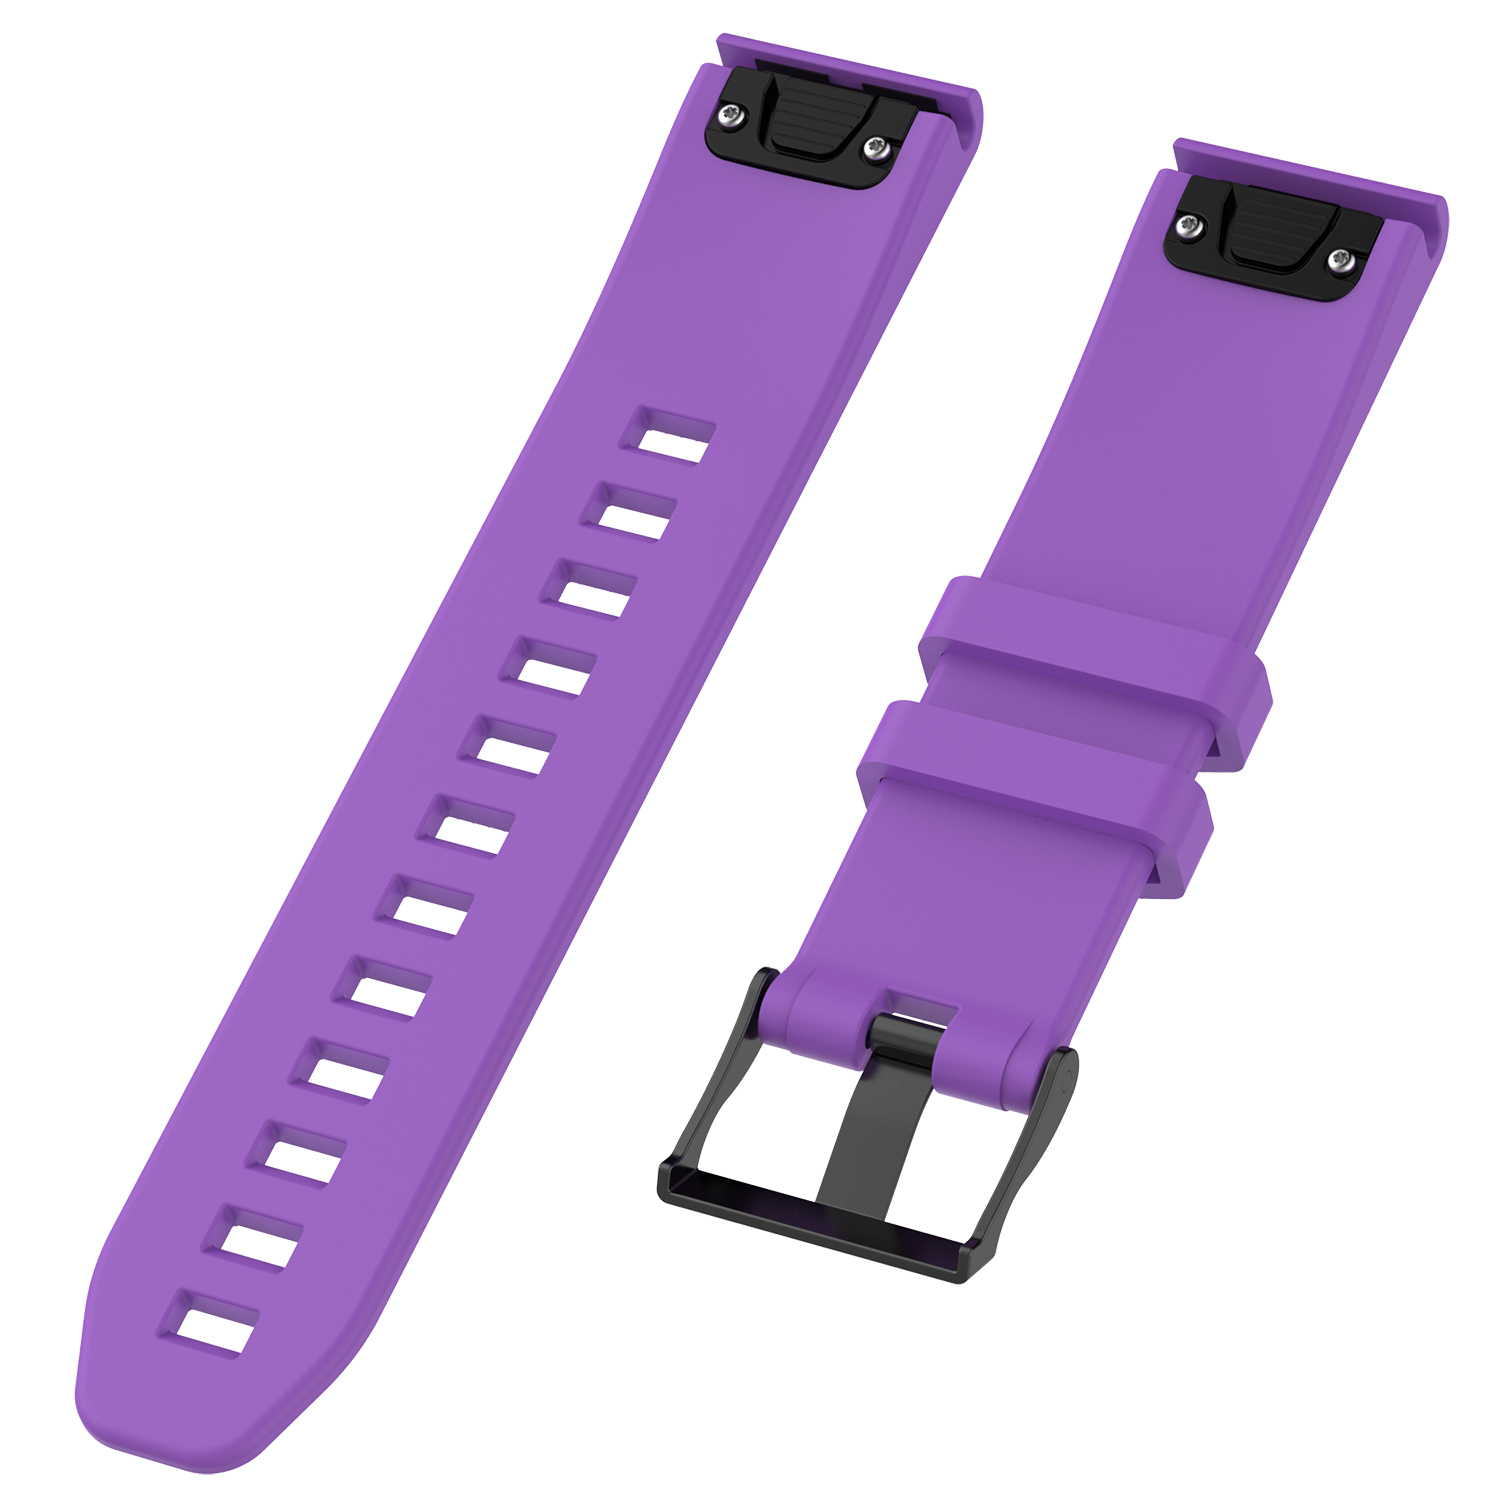 Bakeey-22mm-Quick-Release-Textured-Silicone-Replacement-Strap-Smart-Watch-Band-For-Garmin-Forerunner-1814098-31